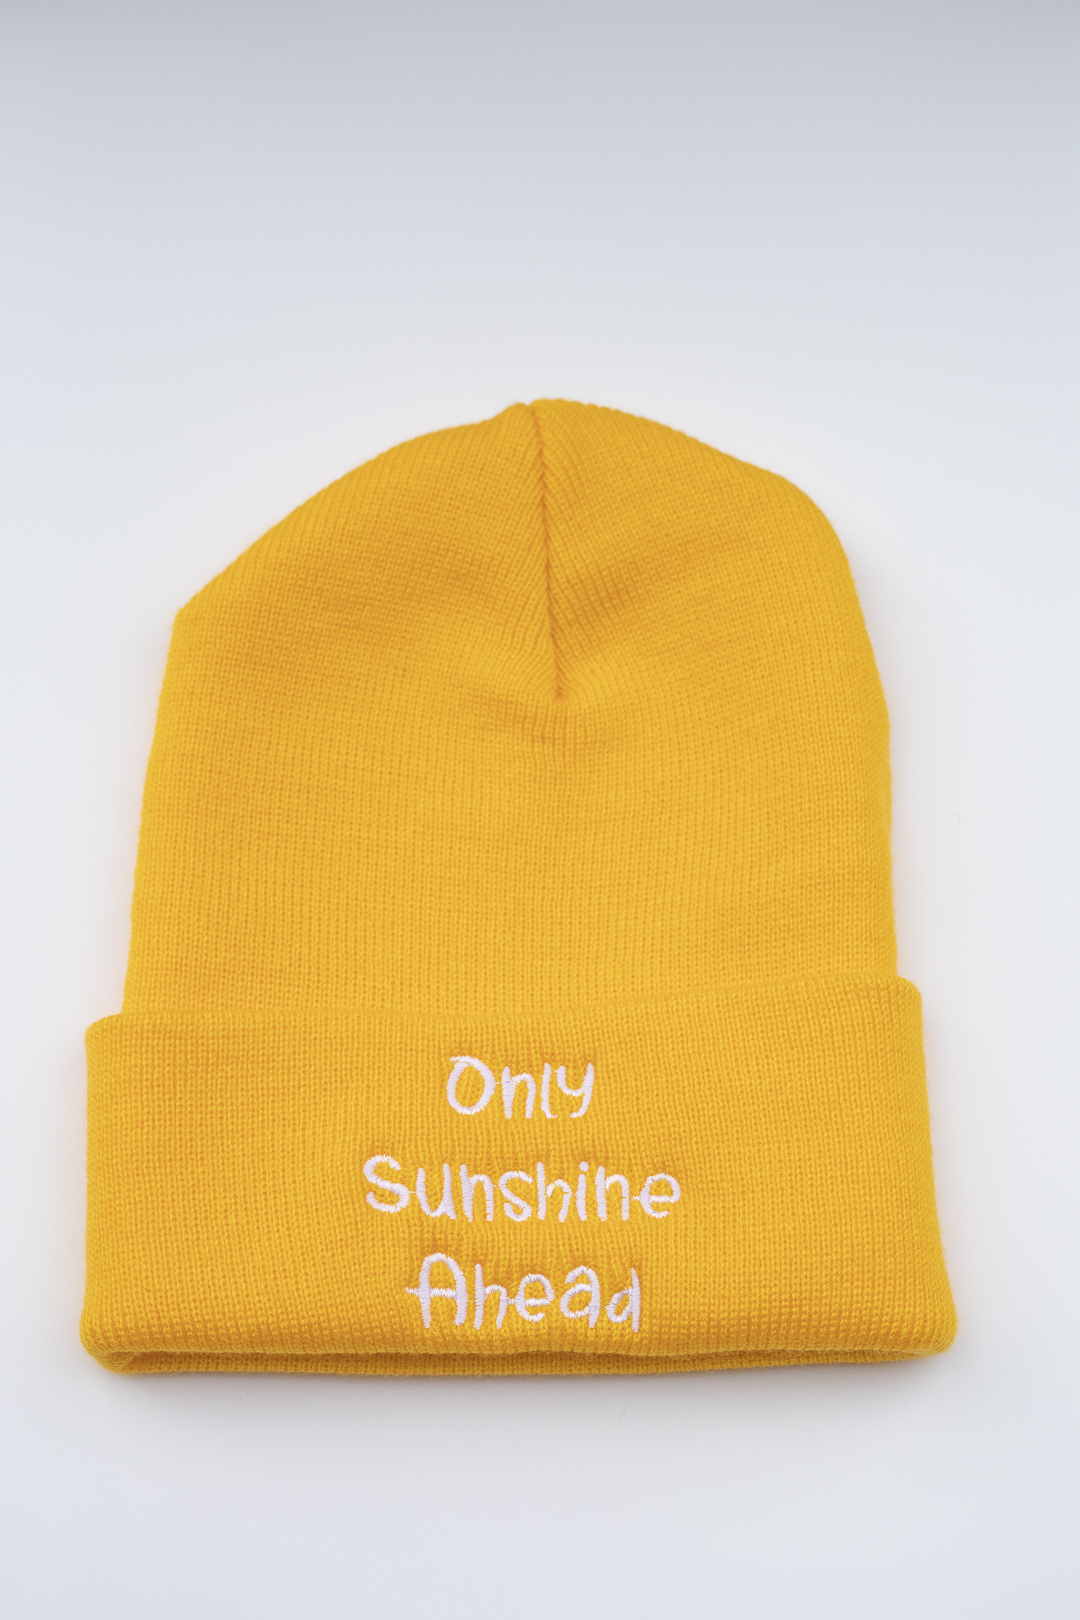 A beanie that says Only Sunshine Ahead.